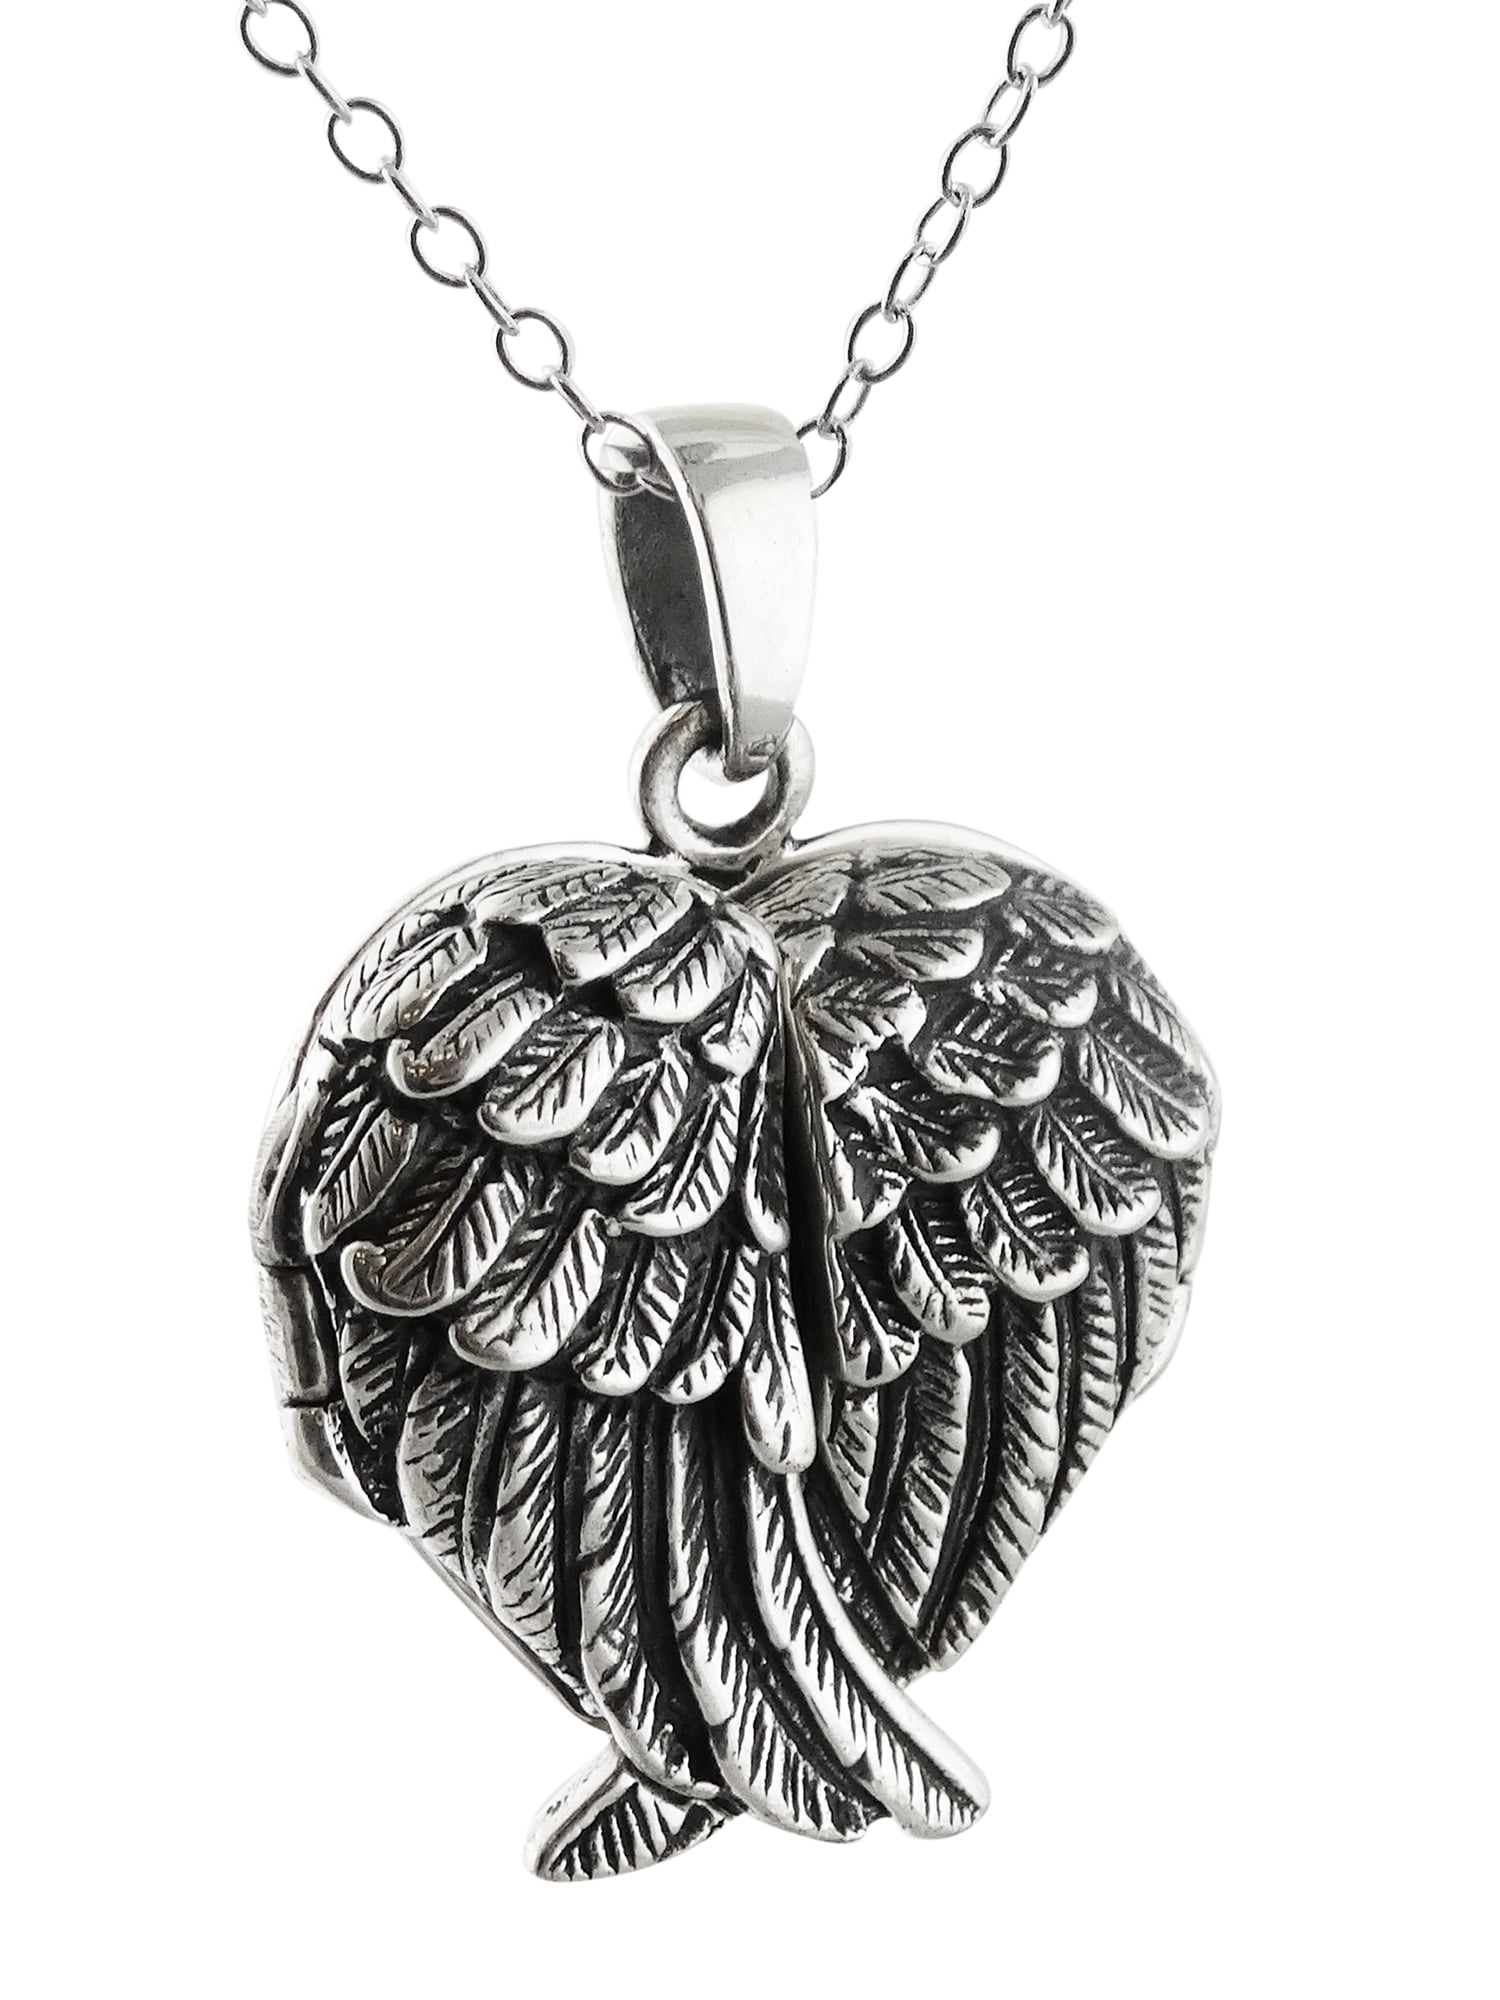 STERLING SILVER ONE SIDED FAIRY WITH WINGS CHARM OR PENDANT 